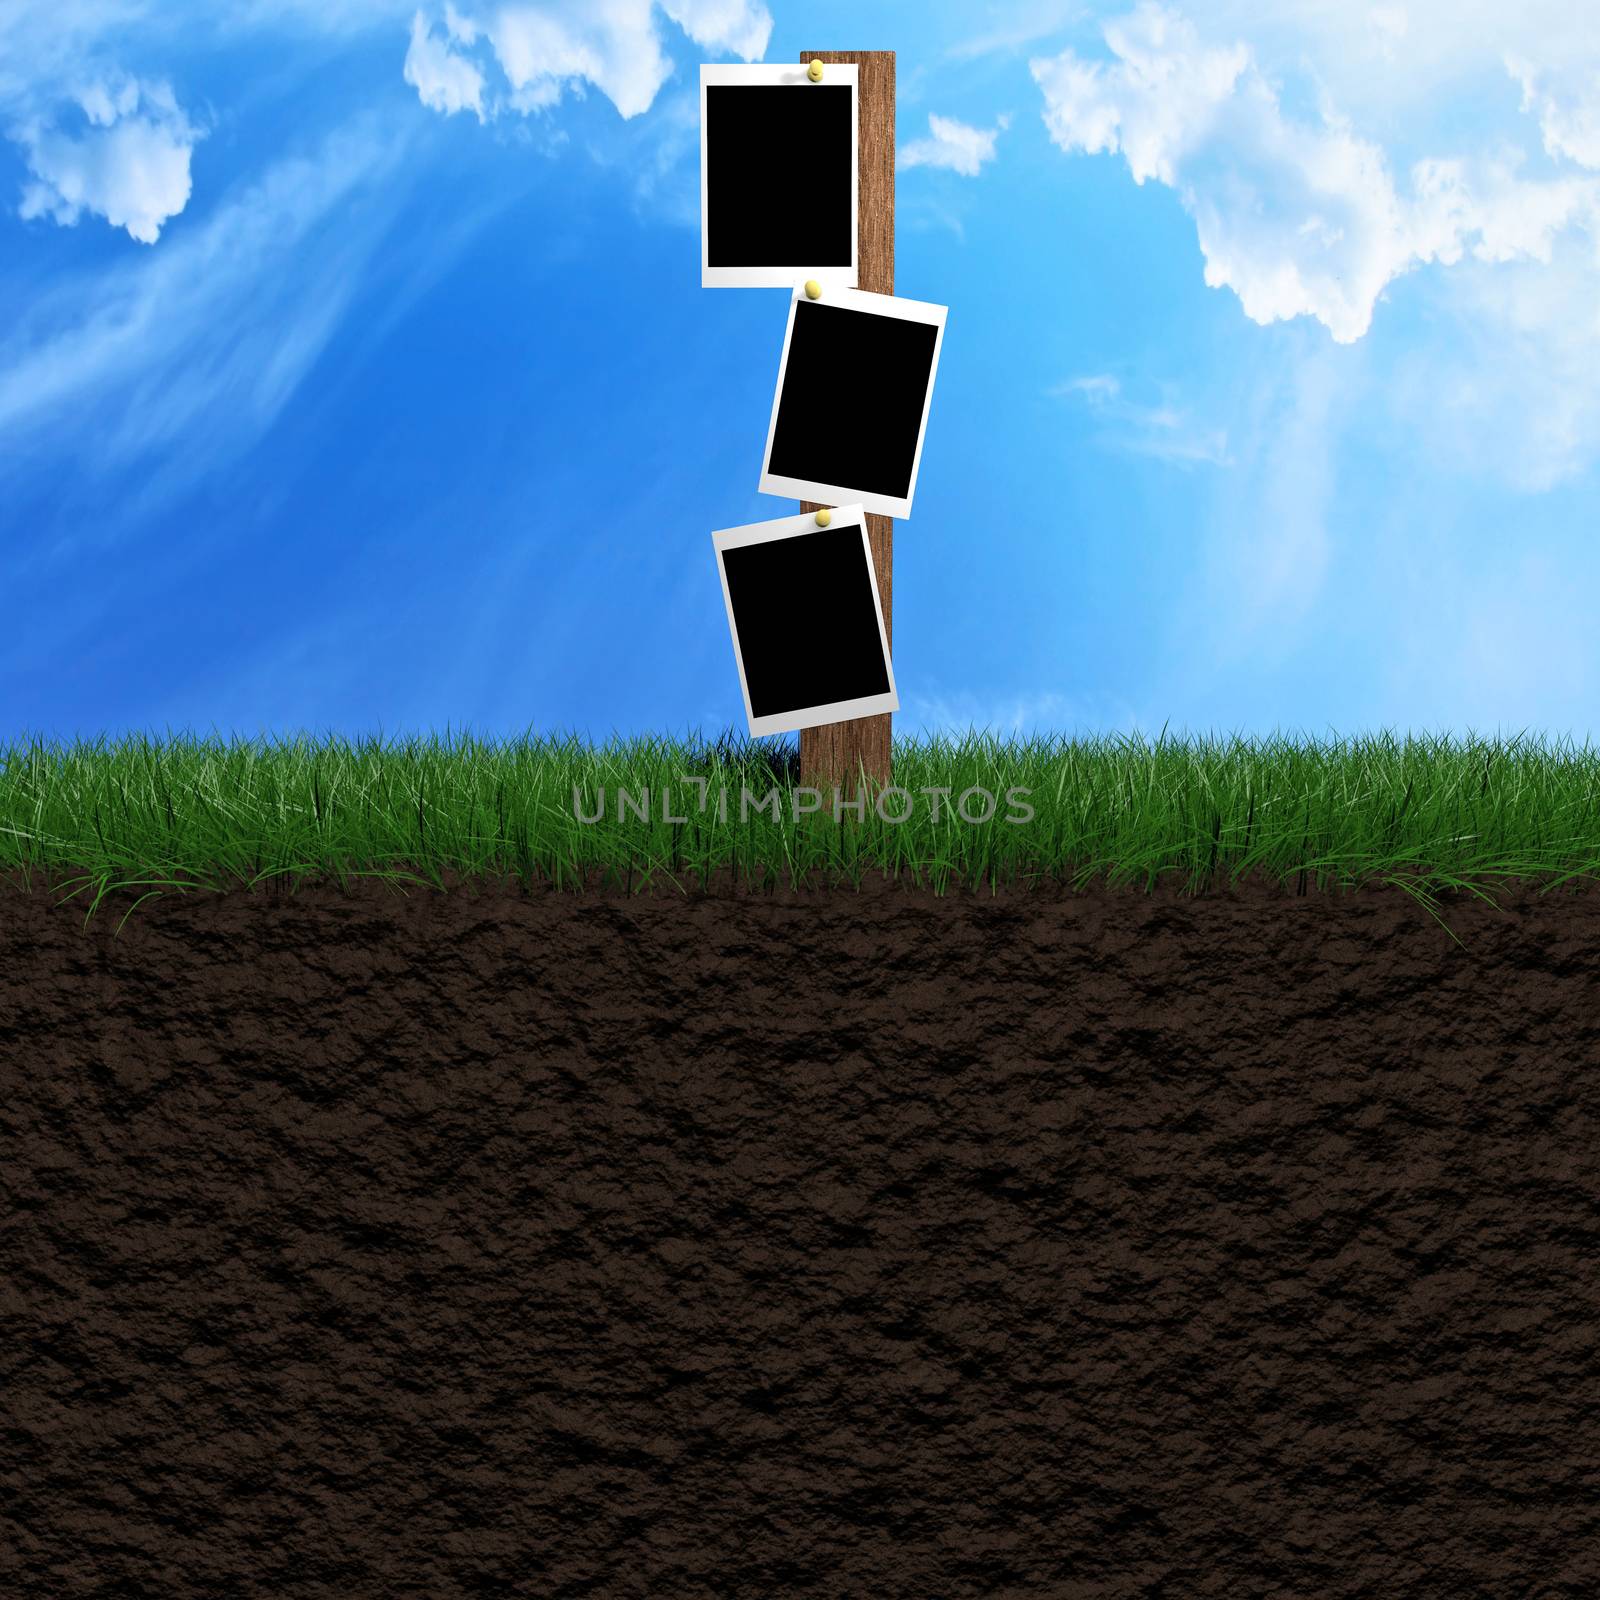 Pictures frames outside on a grass field with beautiful blue sky as background 3d illustration